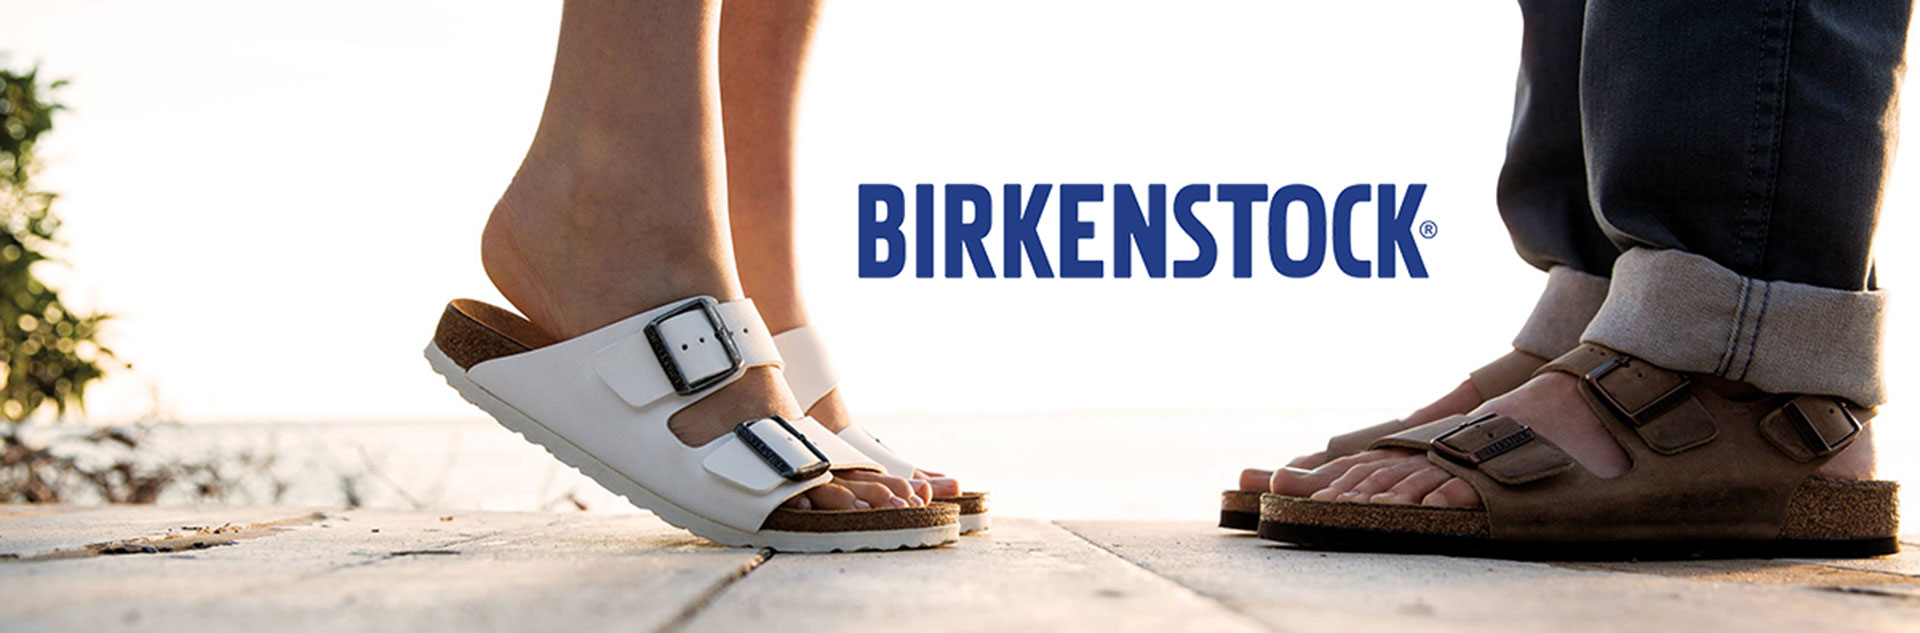 Birkenstock: Crafting Comfort and Style with Sustainability